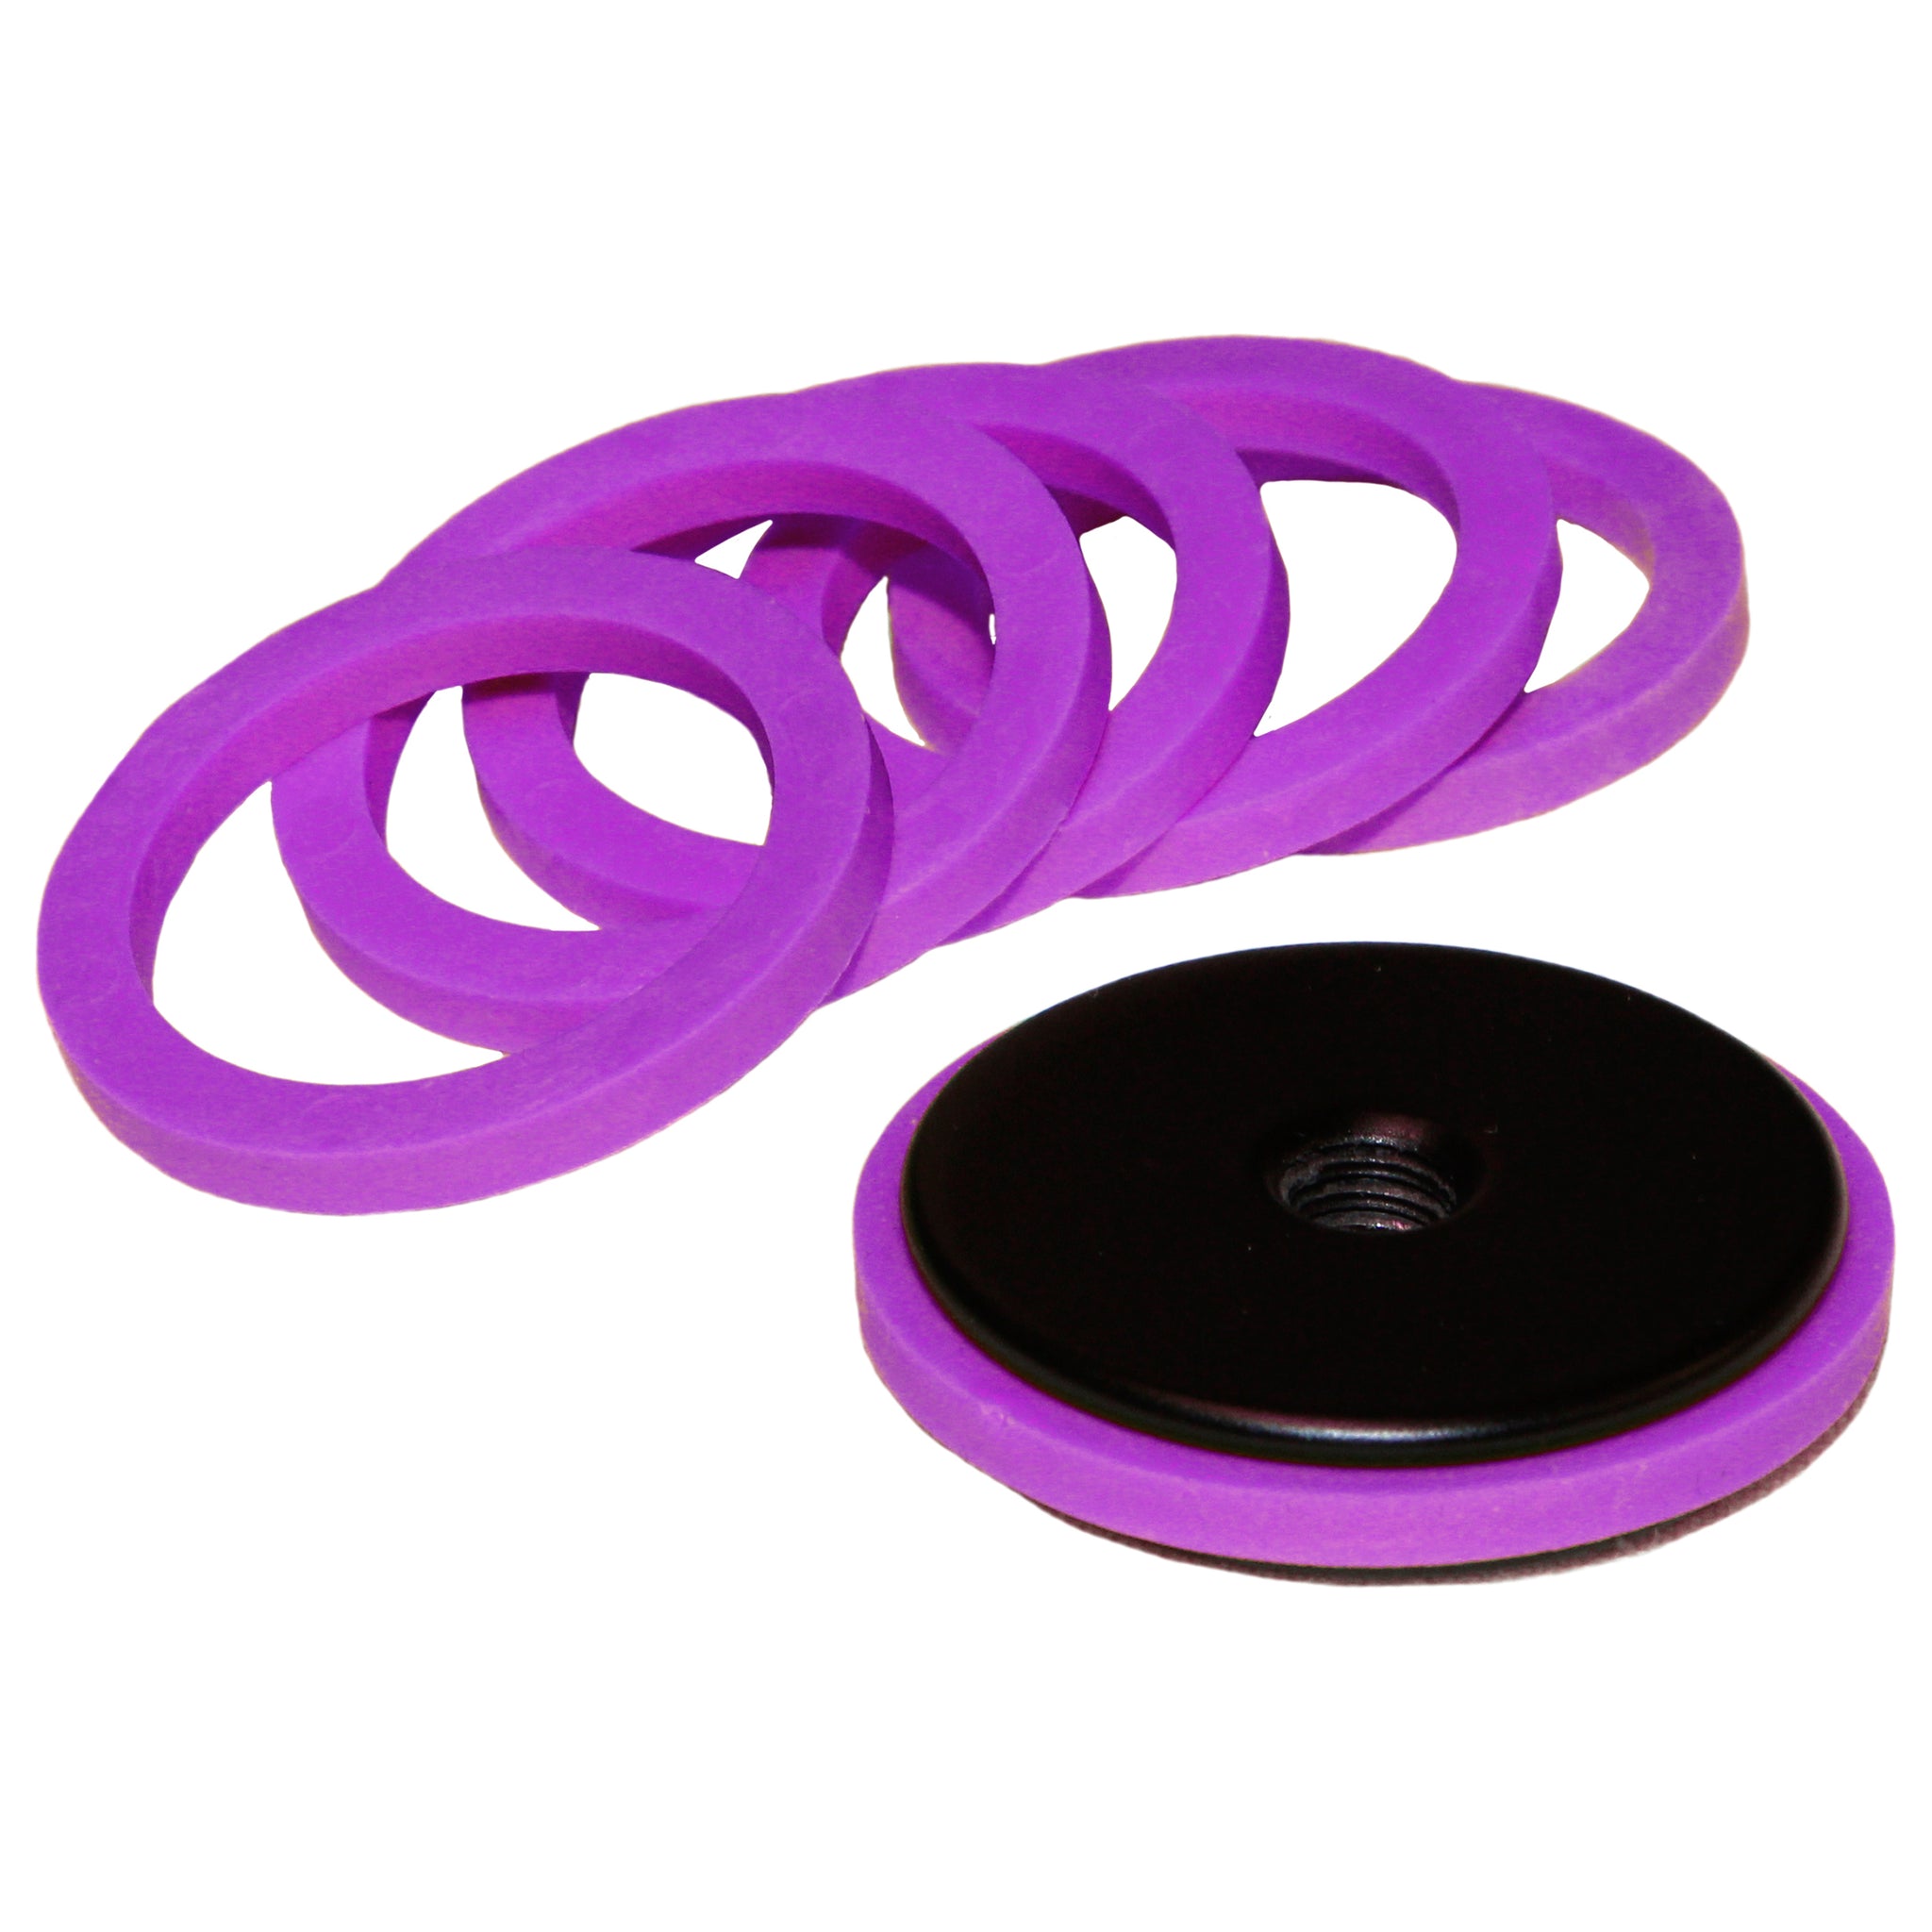 China Rubber Rings Manufacturers, Suppliers, Factory - Customized Rubber  Rings Made in China - Bright Rubber Plastic